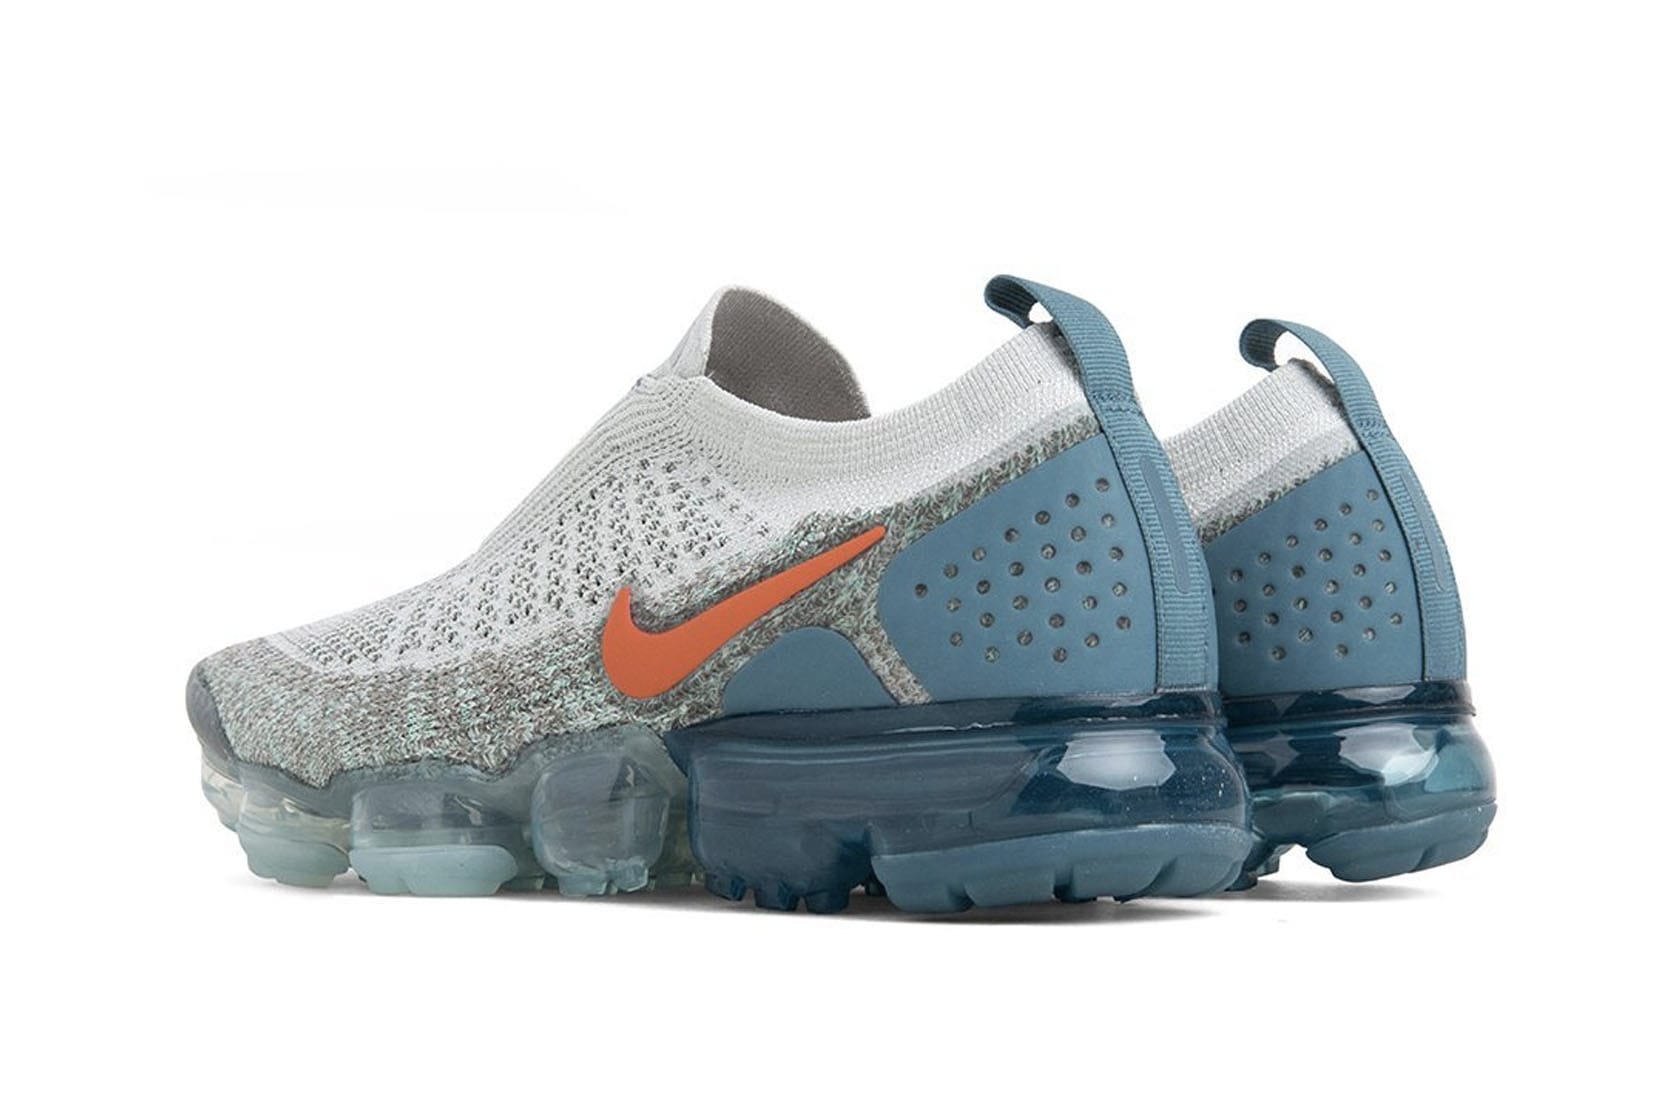 vapormax flyknit 2 blue and orange